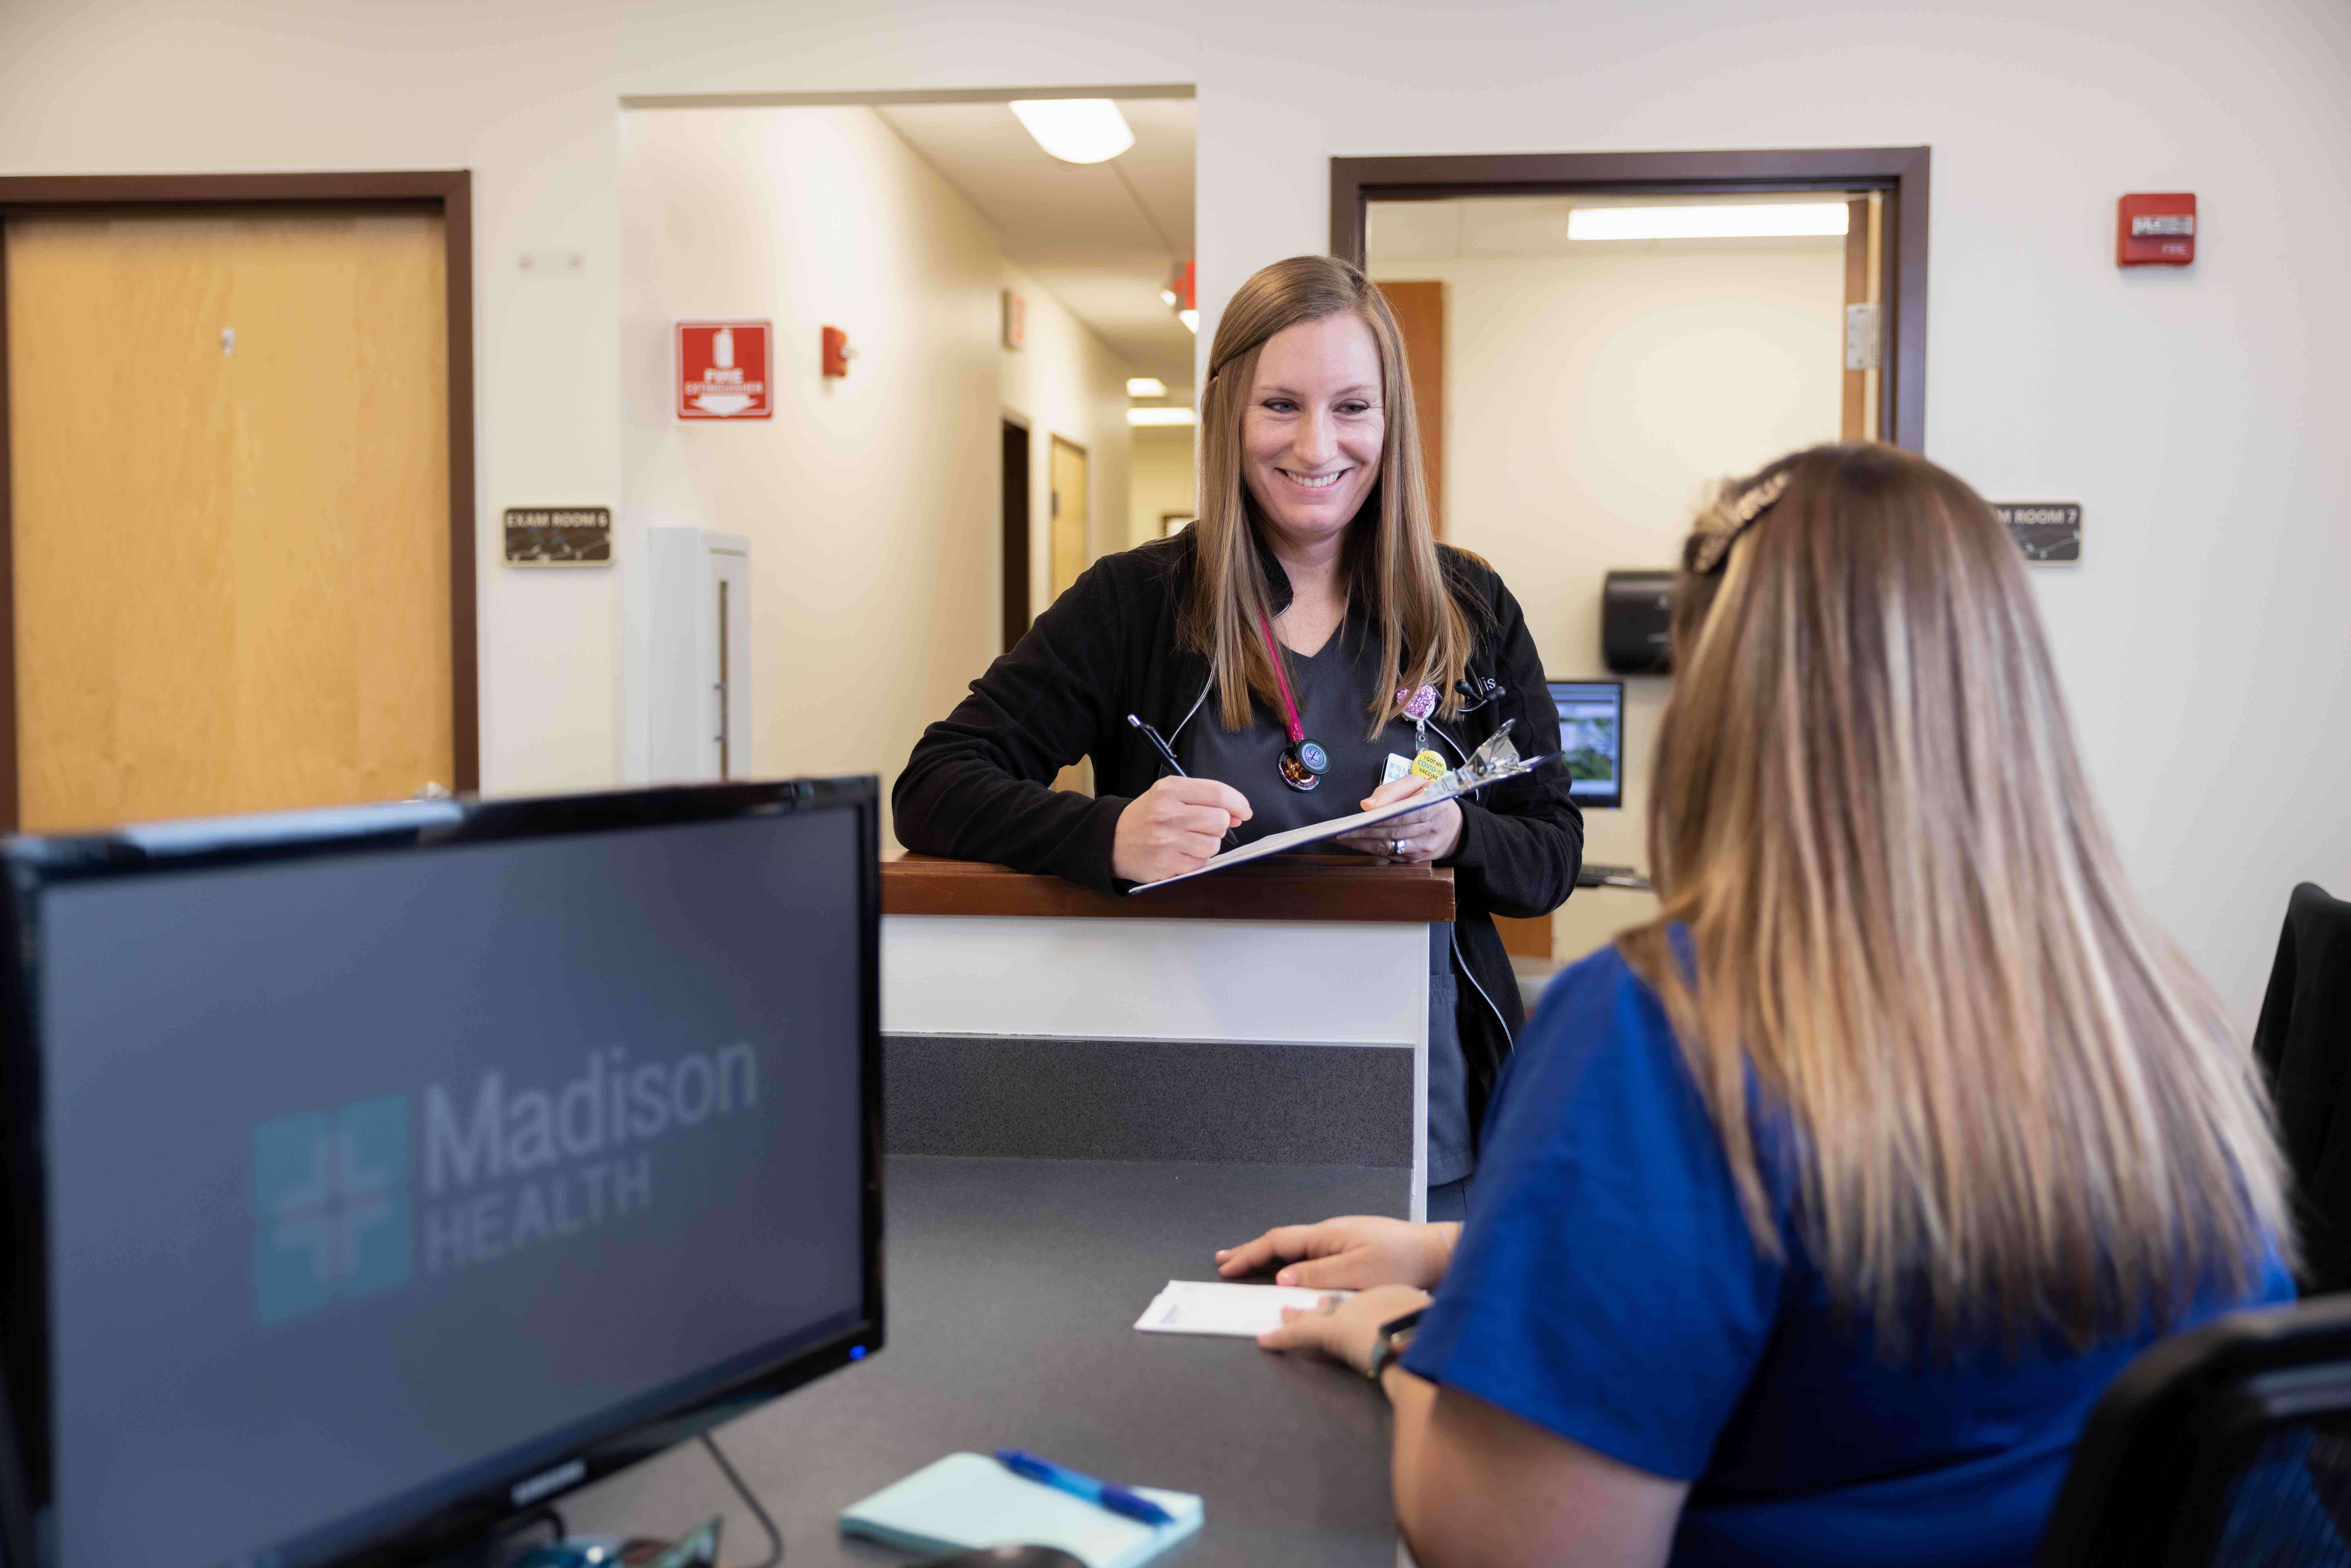 Madison Health About Us, Provider at hospital counter with Nurse.